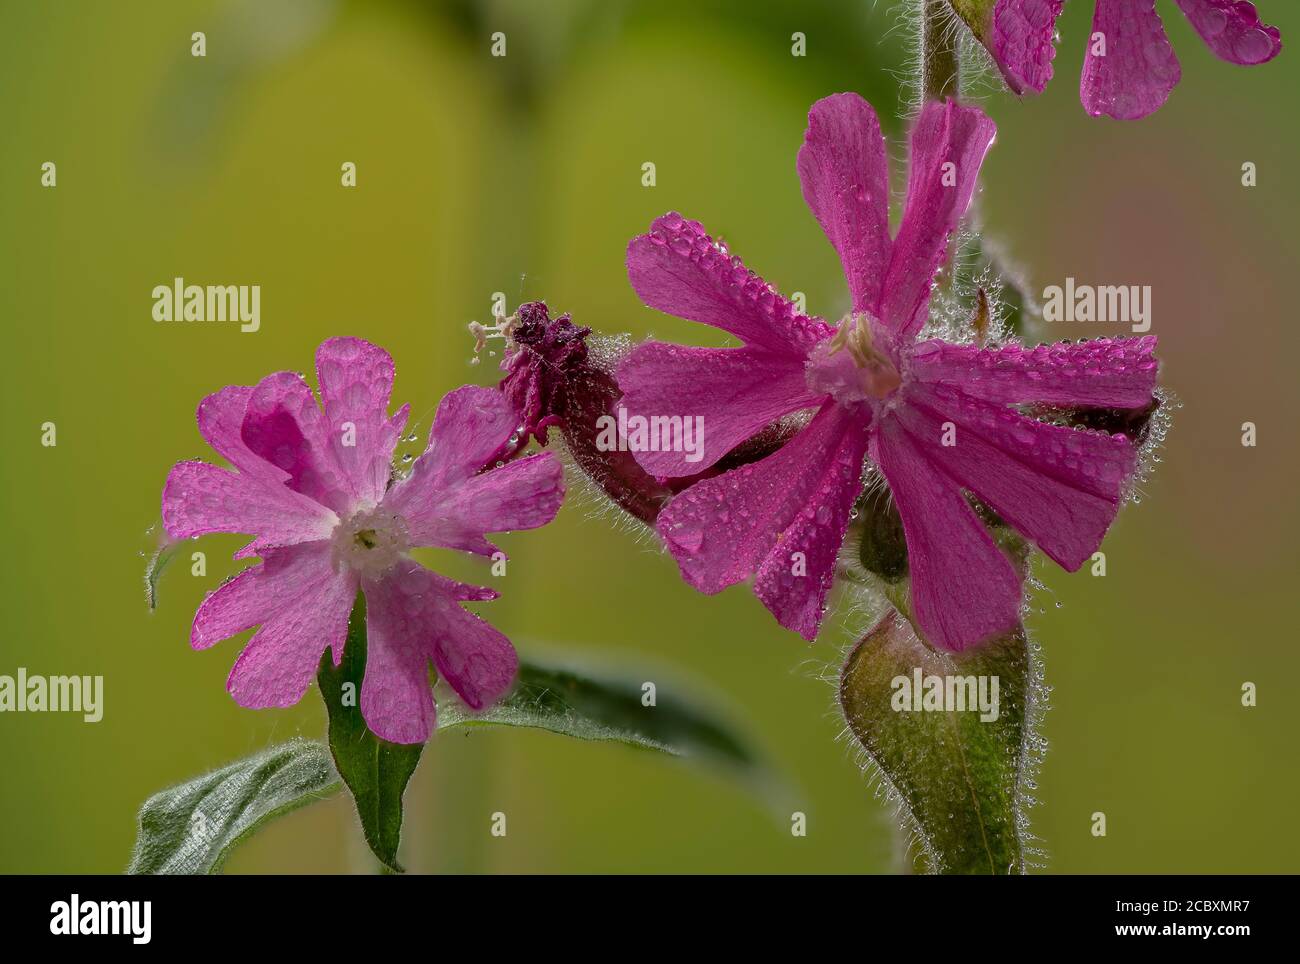 Red campion, Silene dioica, showing male (right) and female (left) flowers. Dioecious. Stock Photo